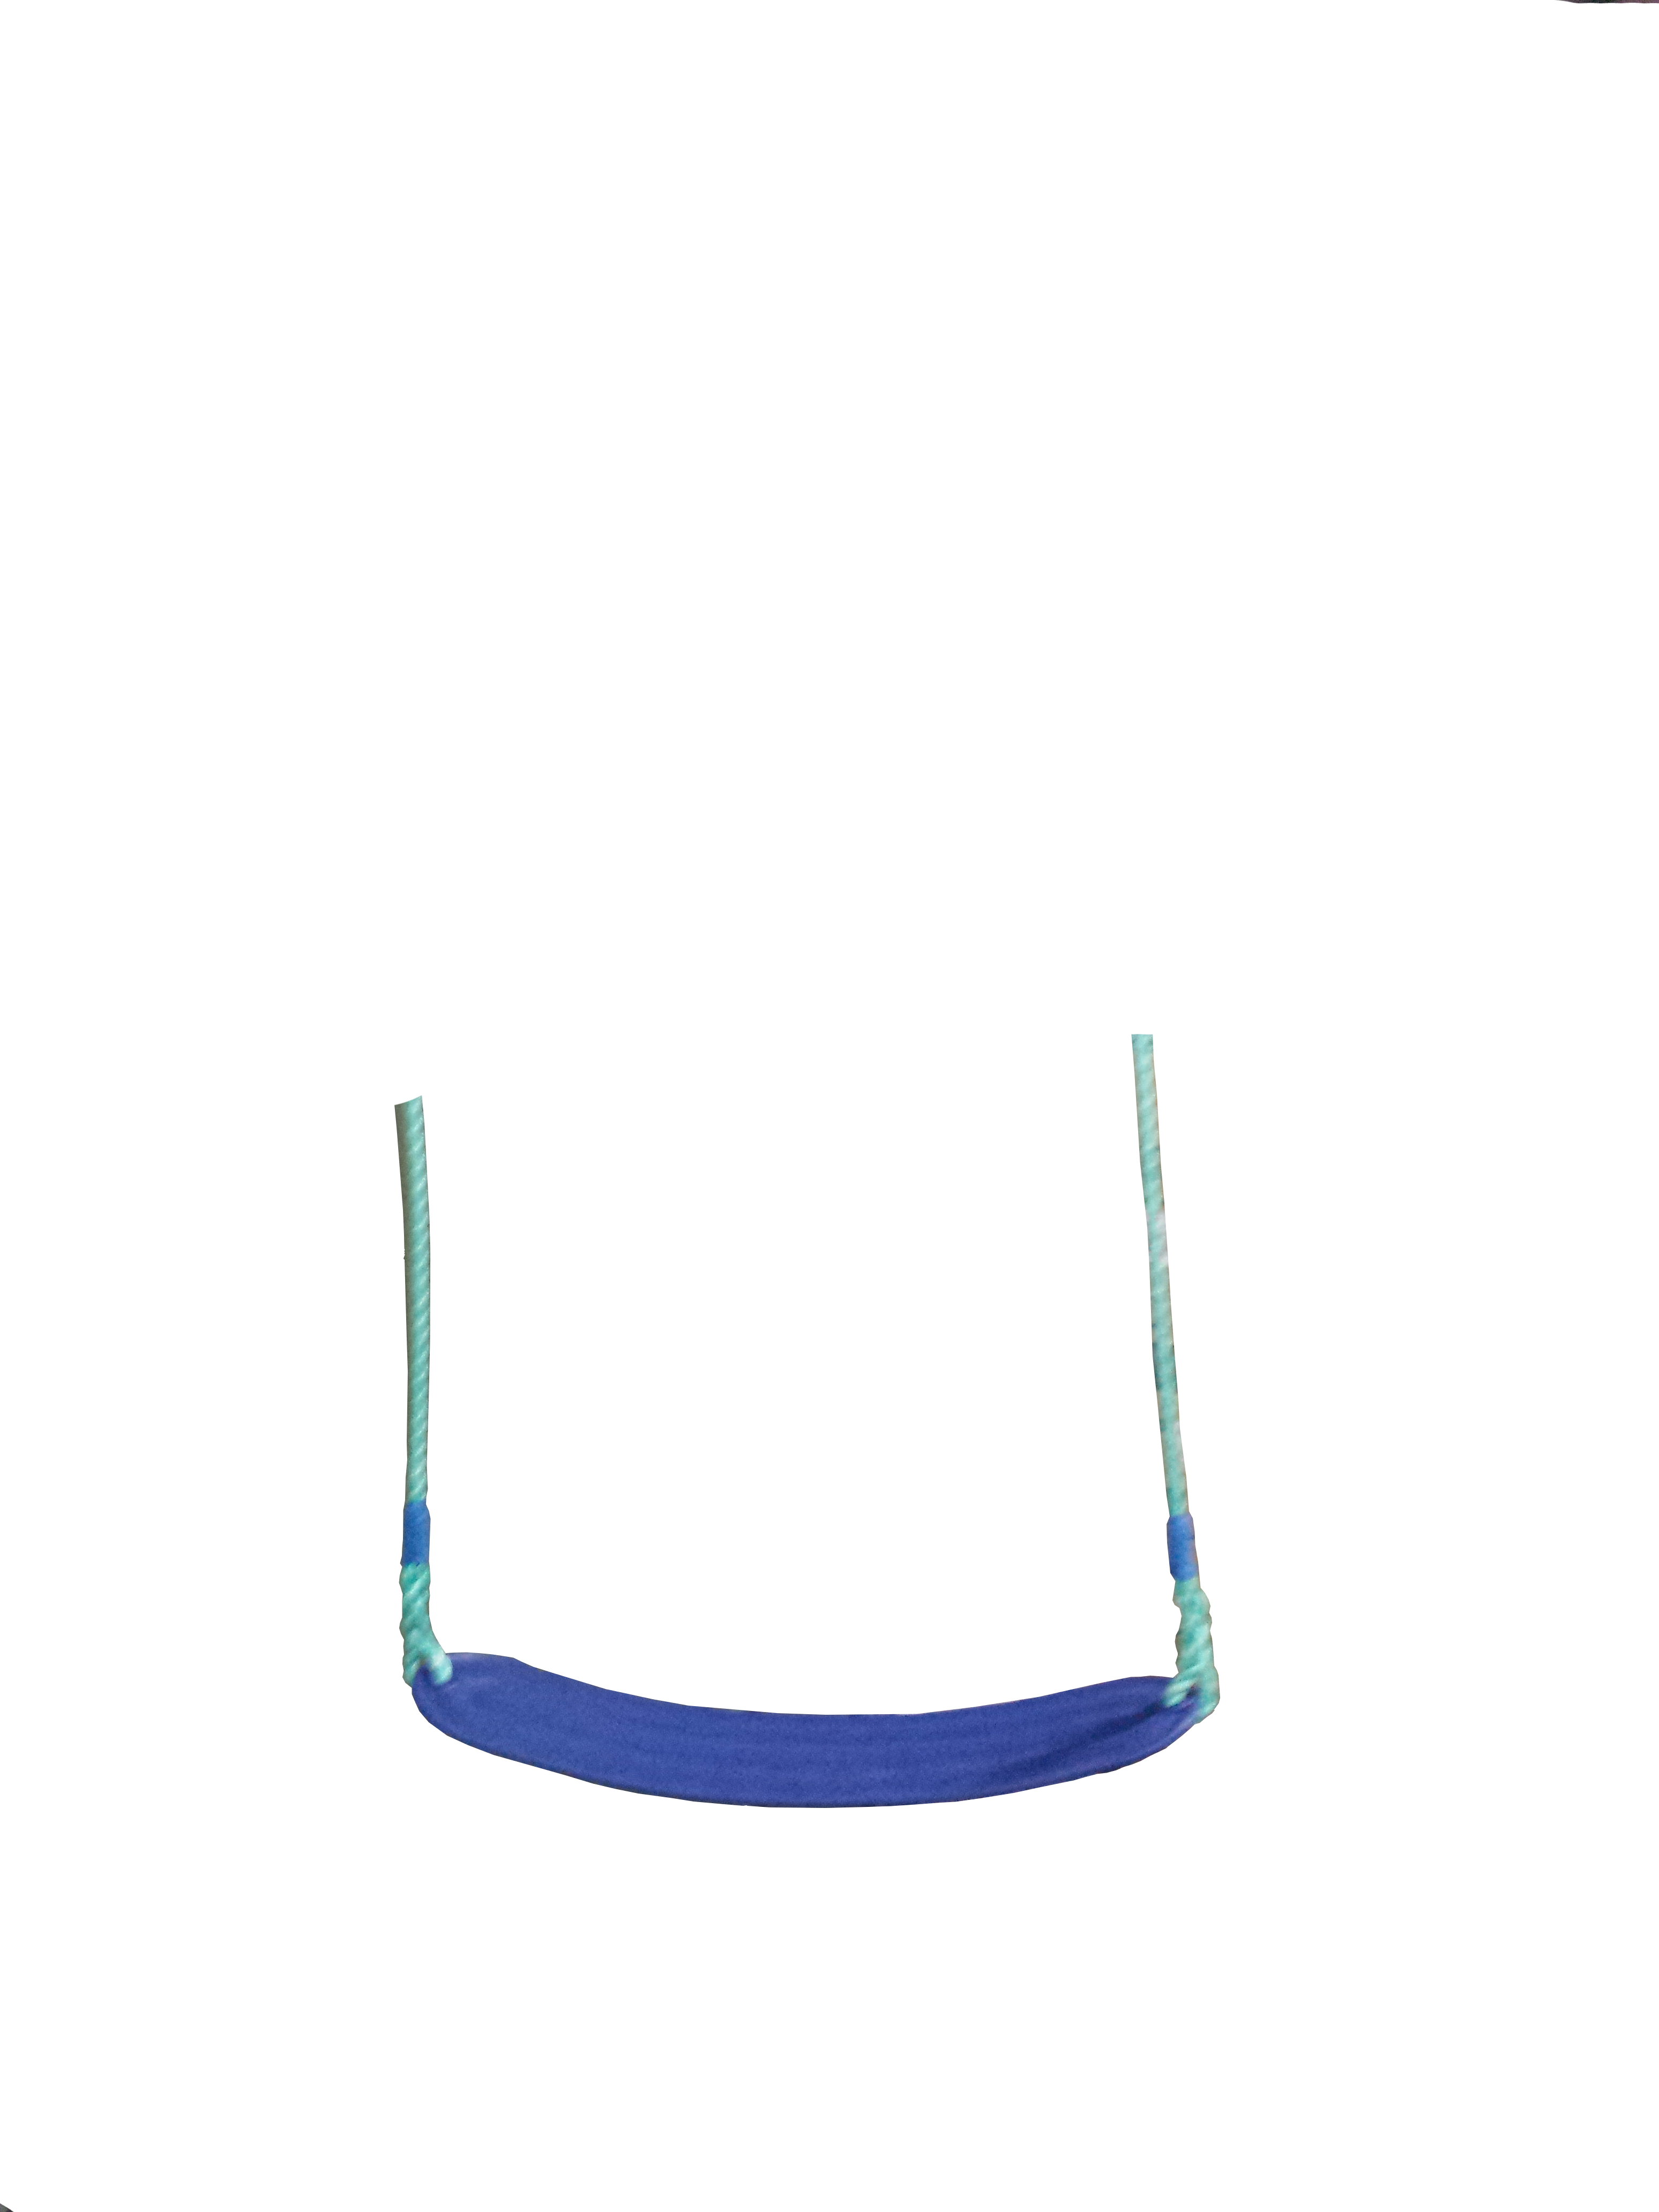 Outdoor Play Equipment - Ribbed Strap Swing